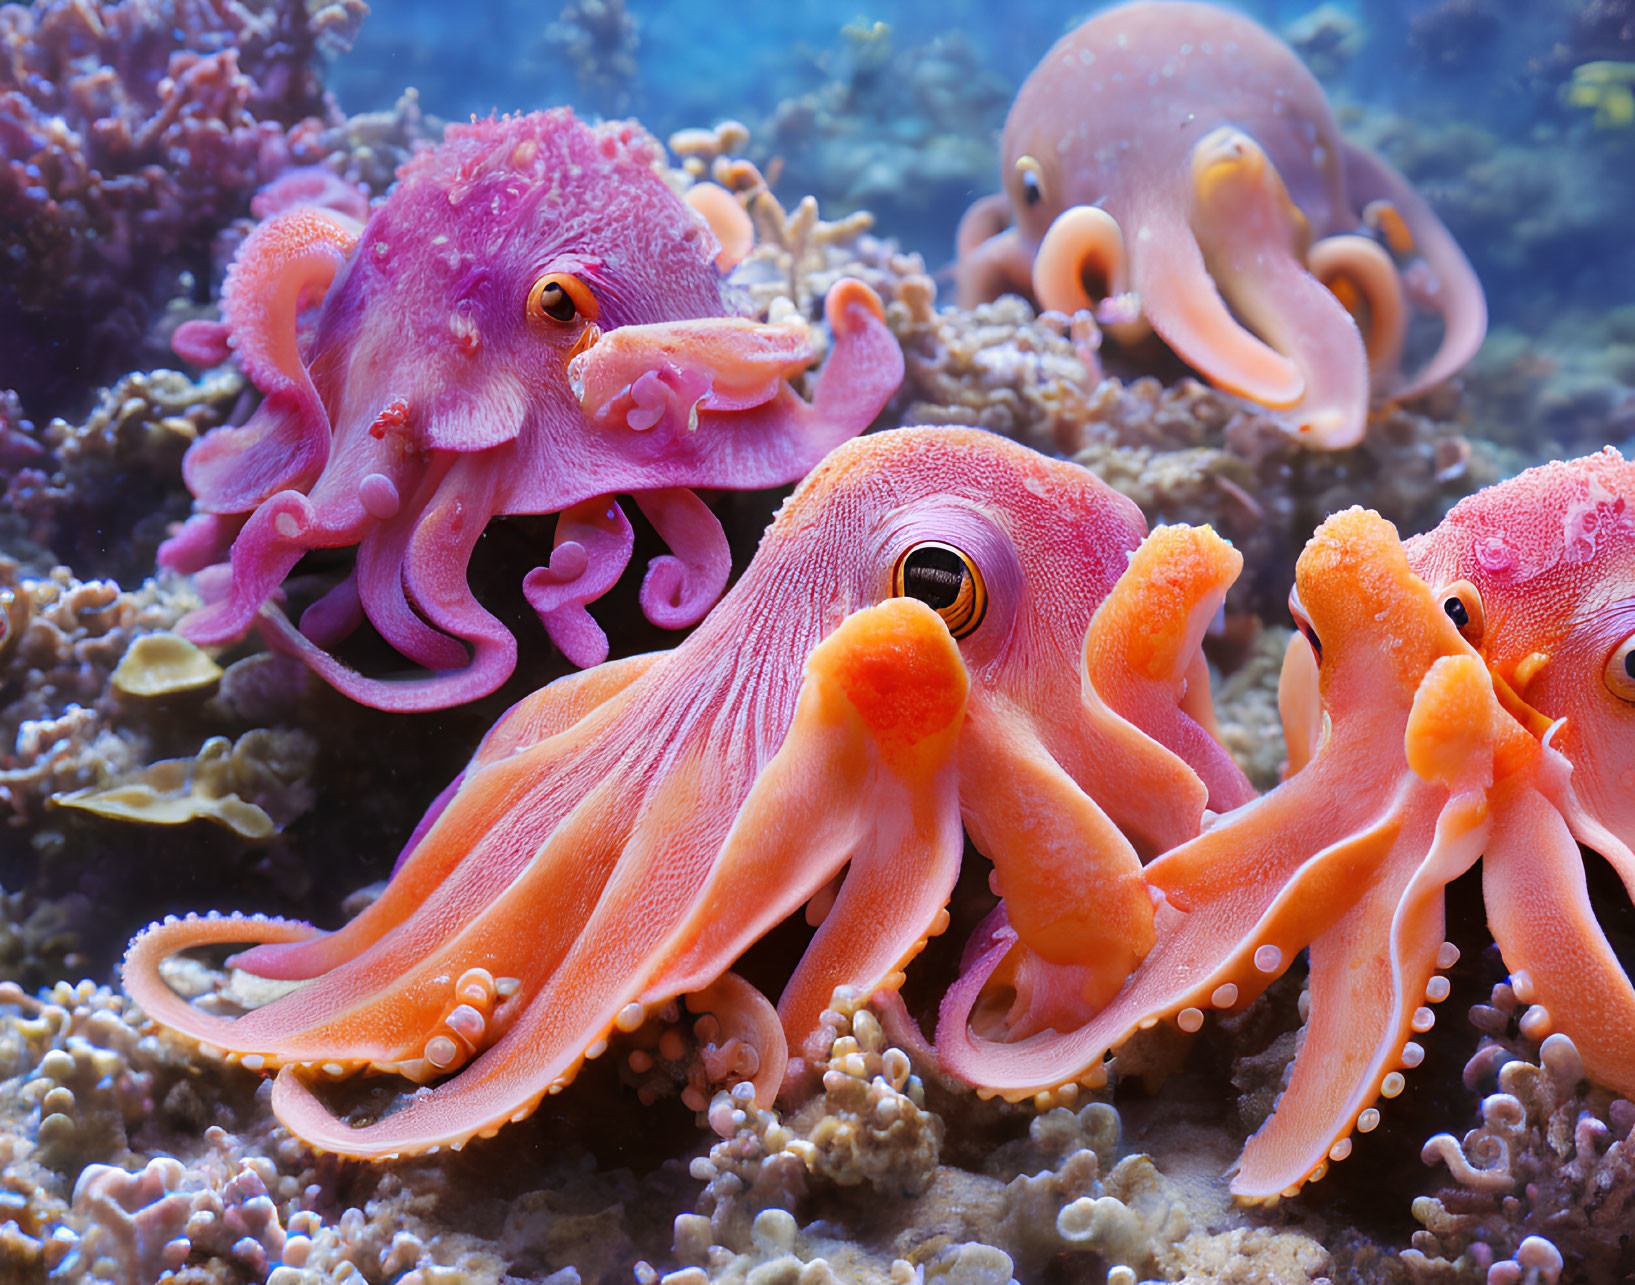 Colorful Coral Reef with Vibrant Pink Octopuses